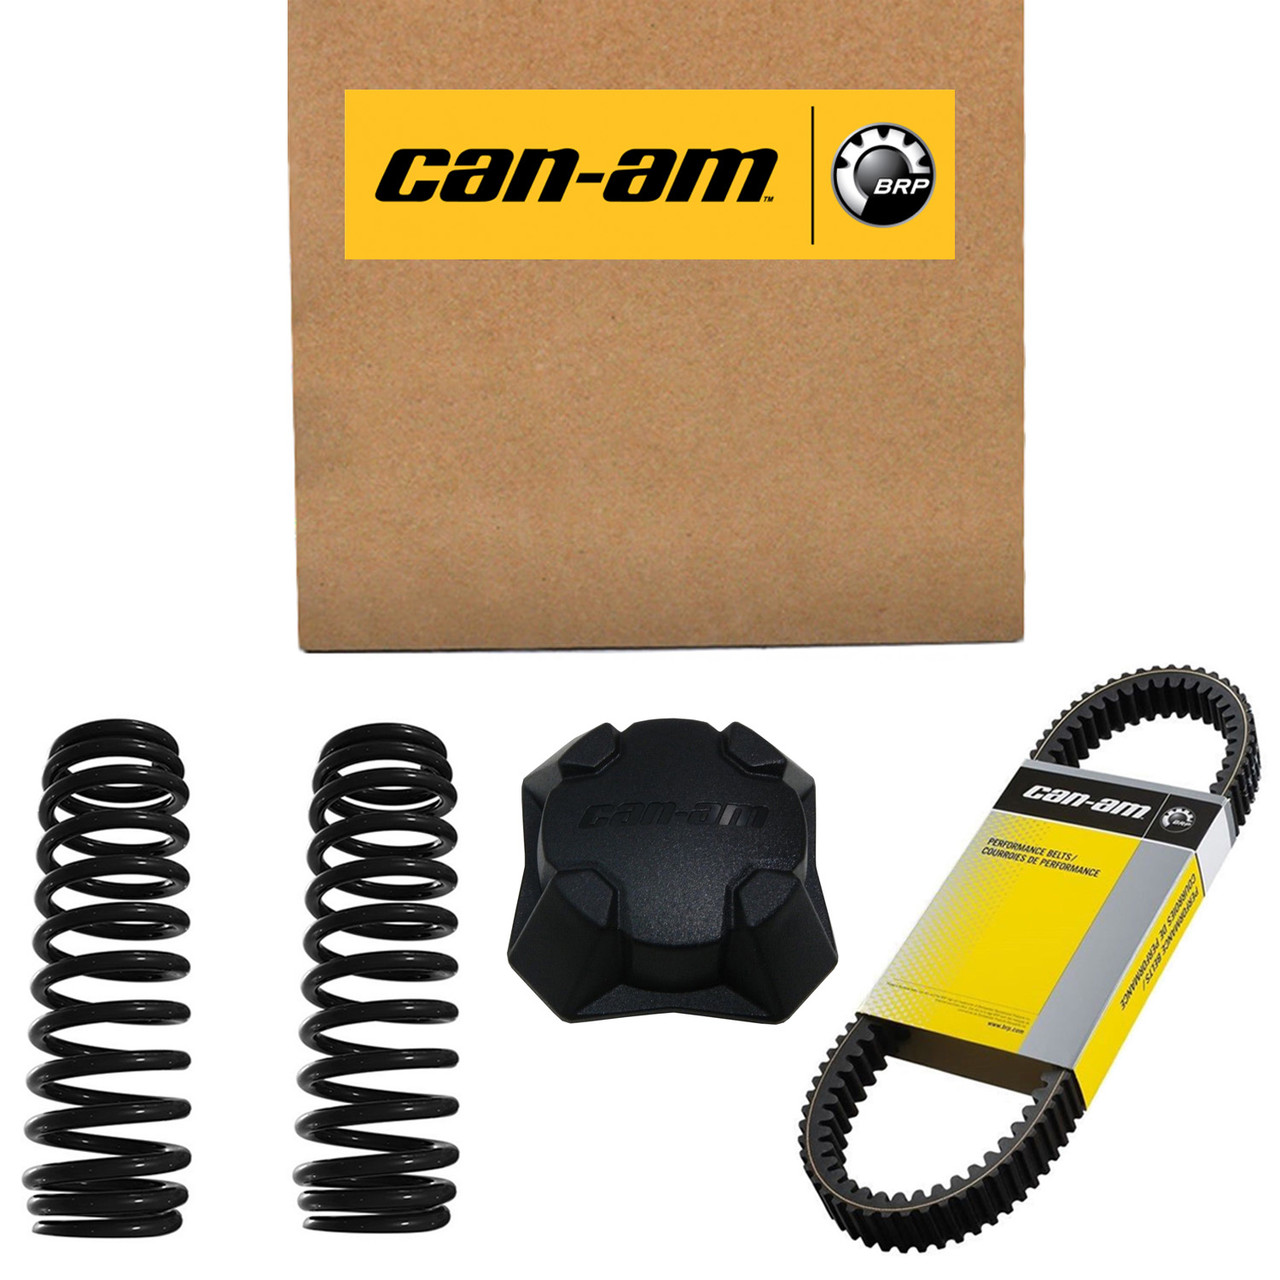 Can-Am New OEM Cargo Box Inside Kit, 715006551